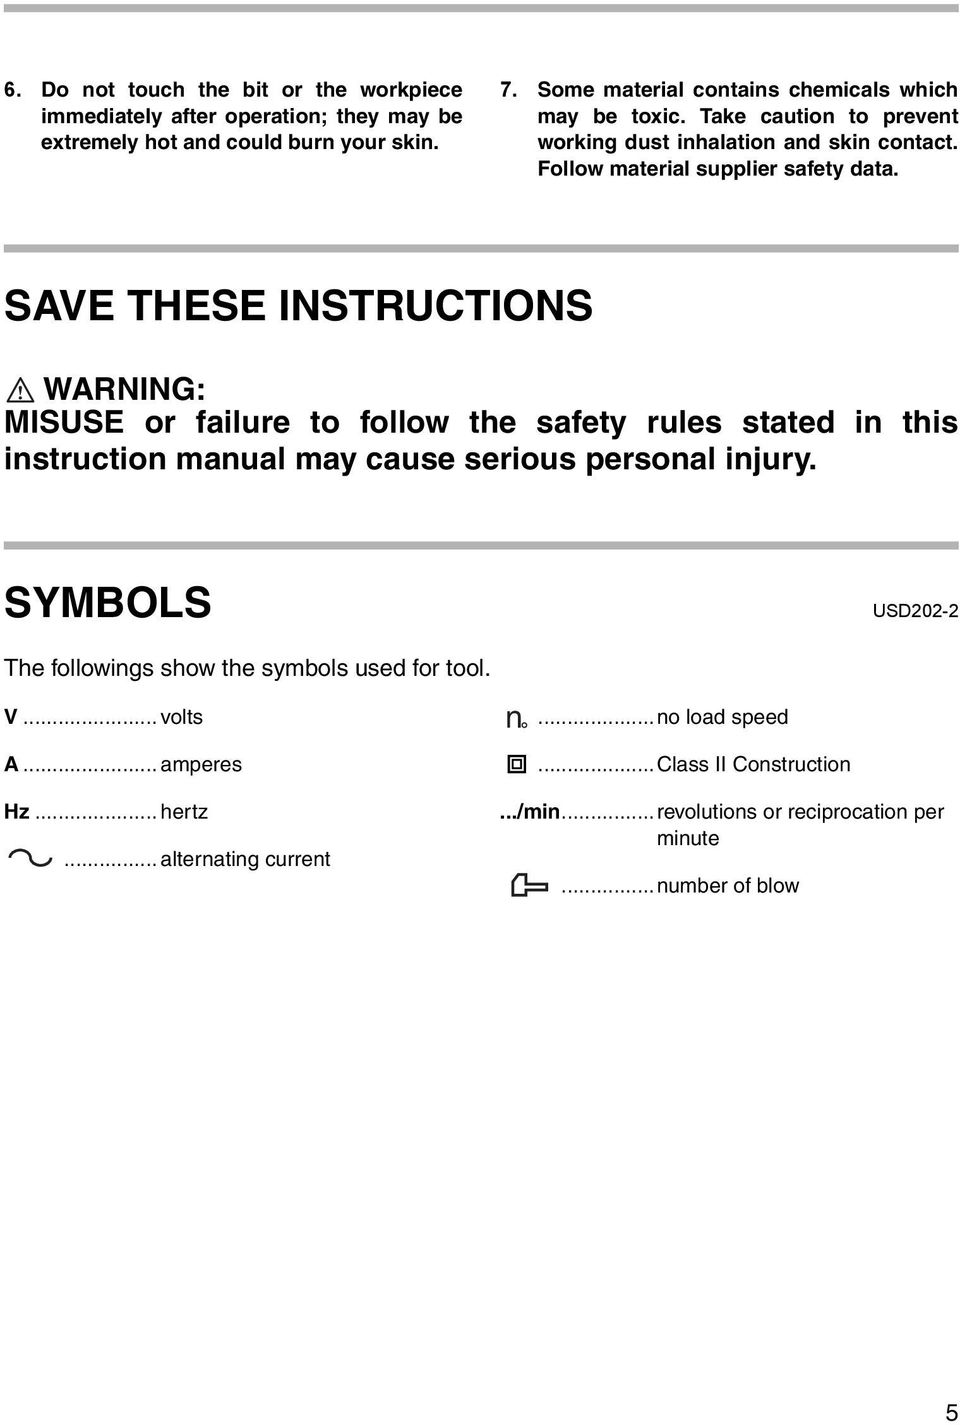 SAVE THESE INSTRUCTIONS WARNING: MISUSE or failure to follow the safety rules stated in this instruction manual may cause serious personal injury.